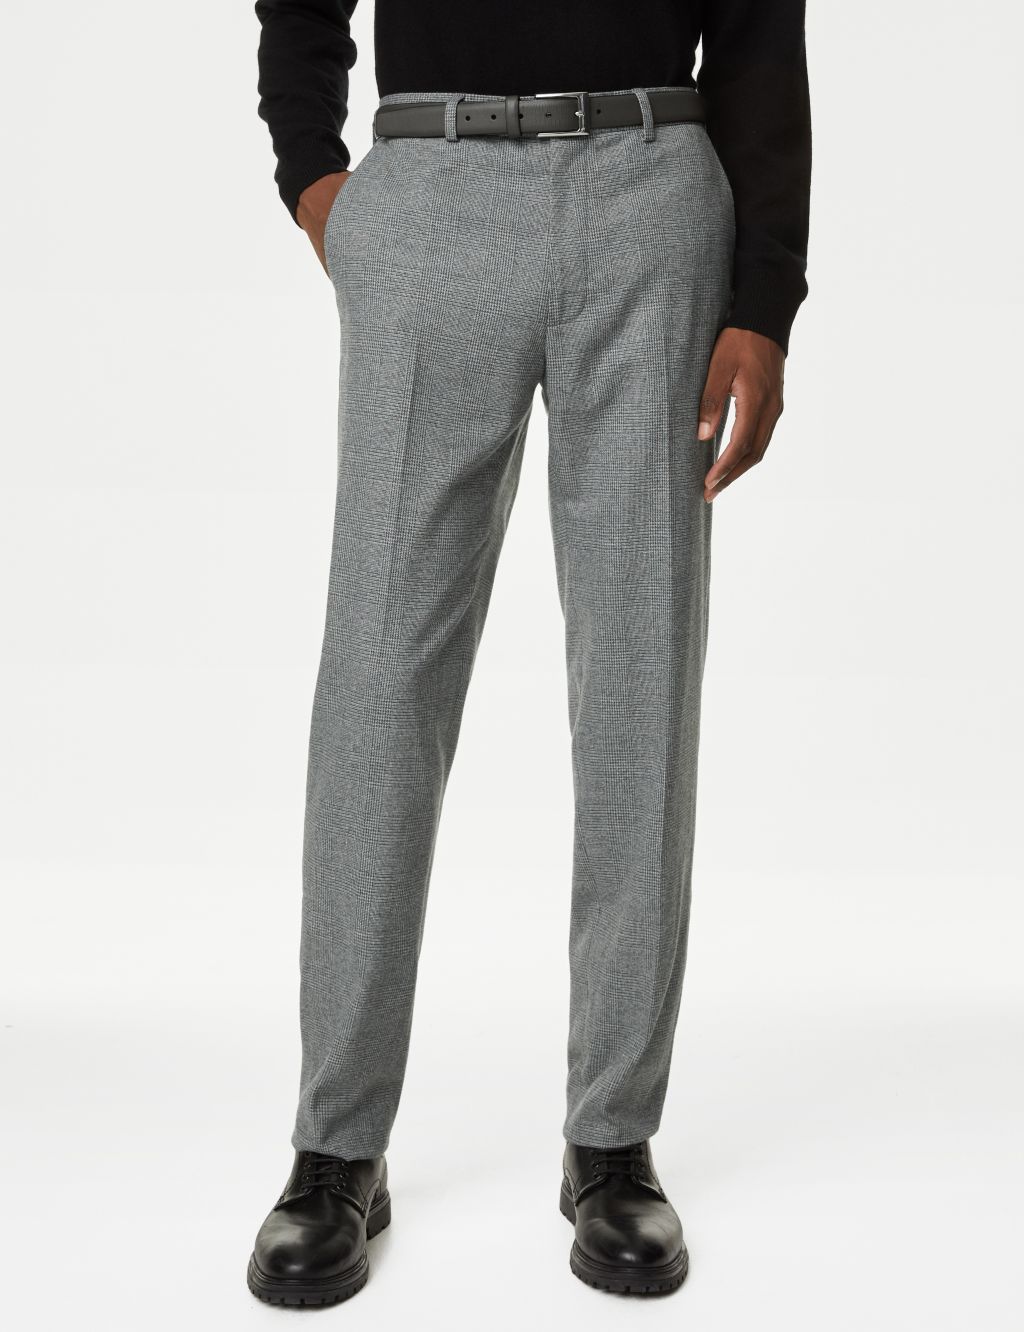 Tailored Fit Check Stretch Trousers image 3